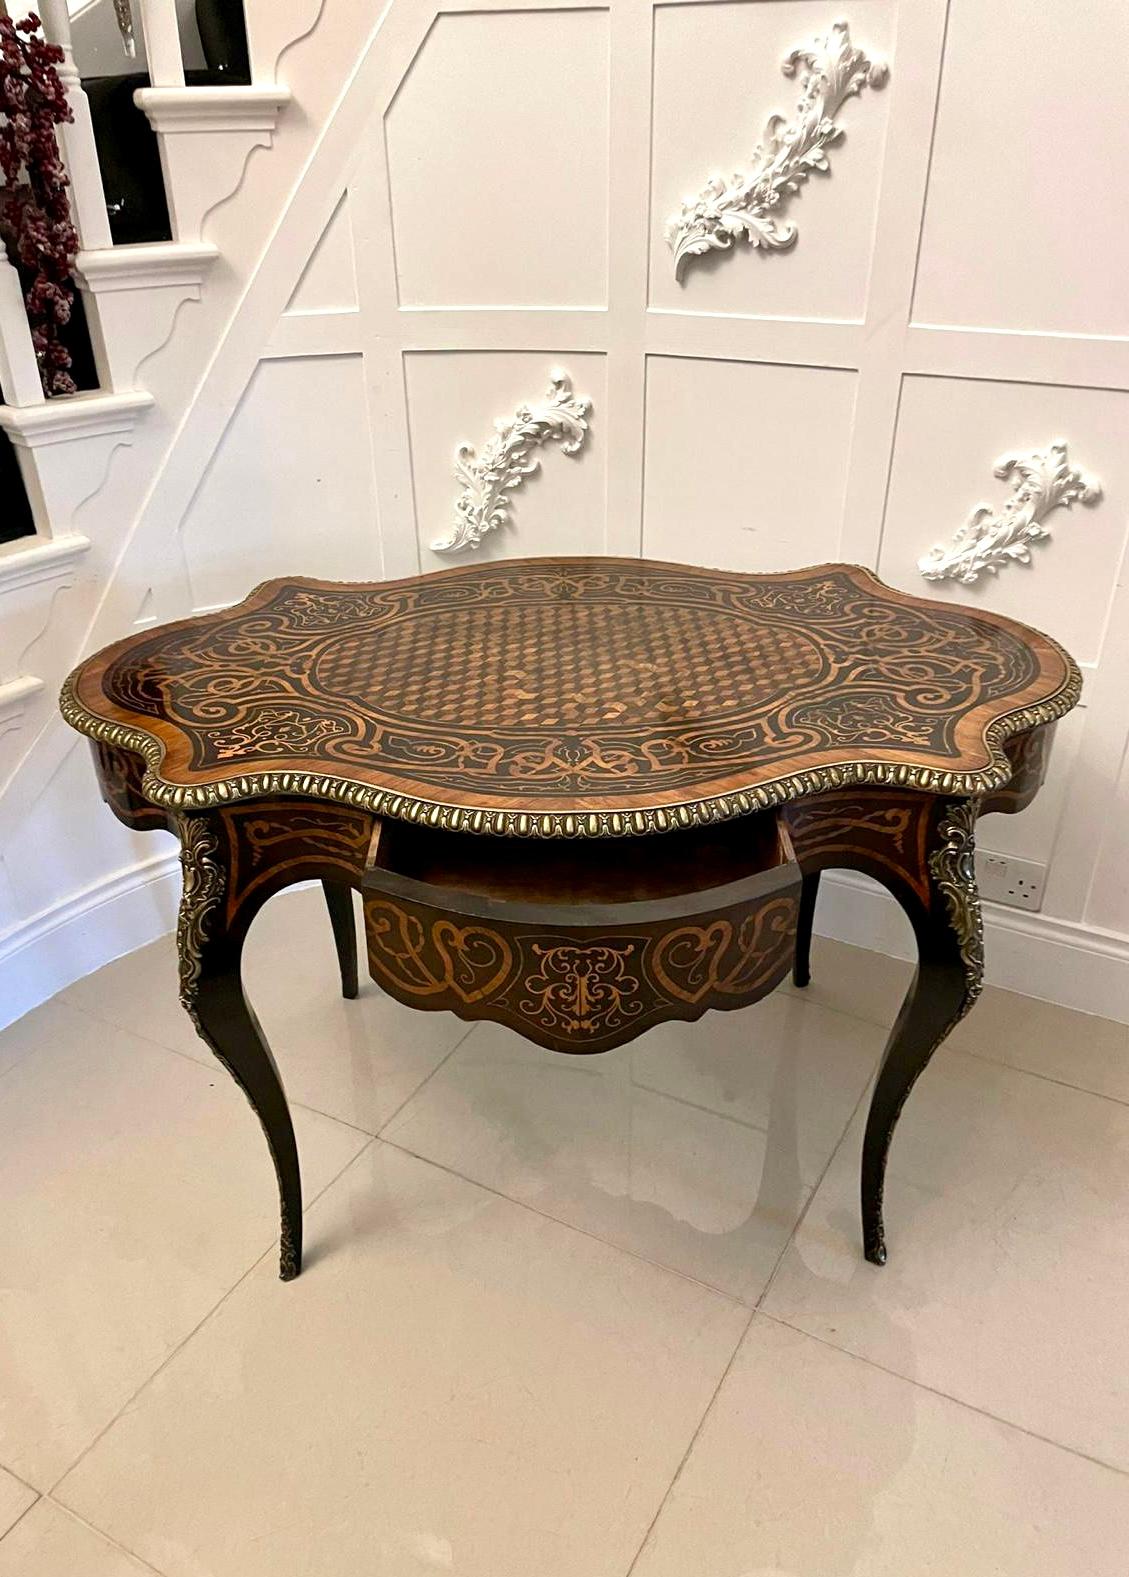 
Outstanding quality antique Victorian French freestanding marquetry and parquetry centre table 
having a magnificent quality serpentine shaped marquetry and parquetry inlaid top with an ornate ormolu edge, inlaid marquetry serpentine shaped